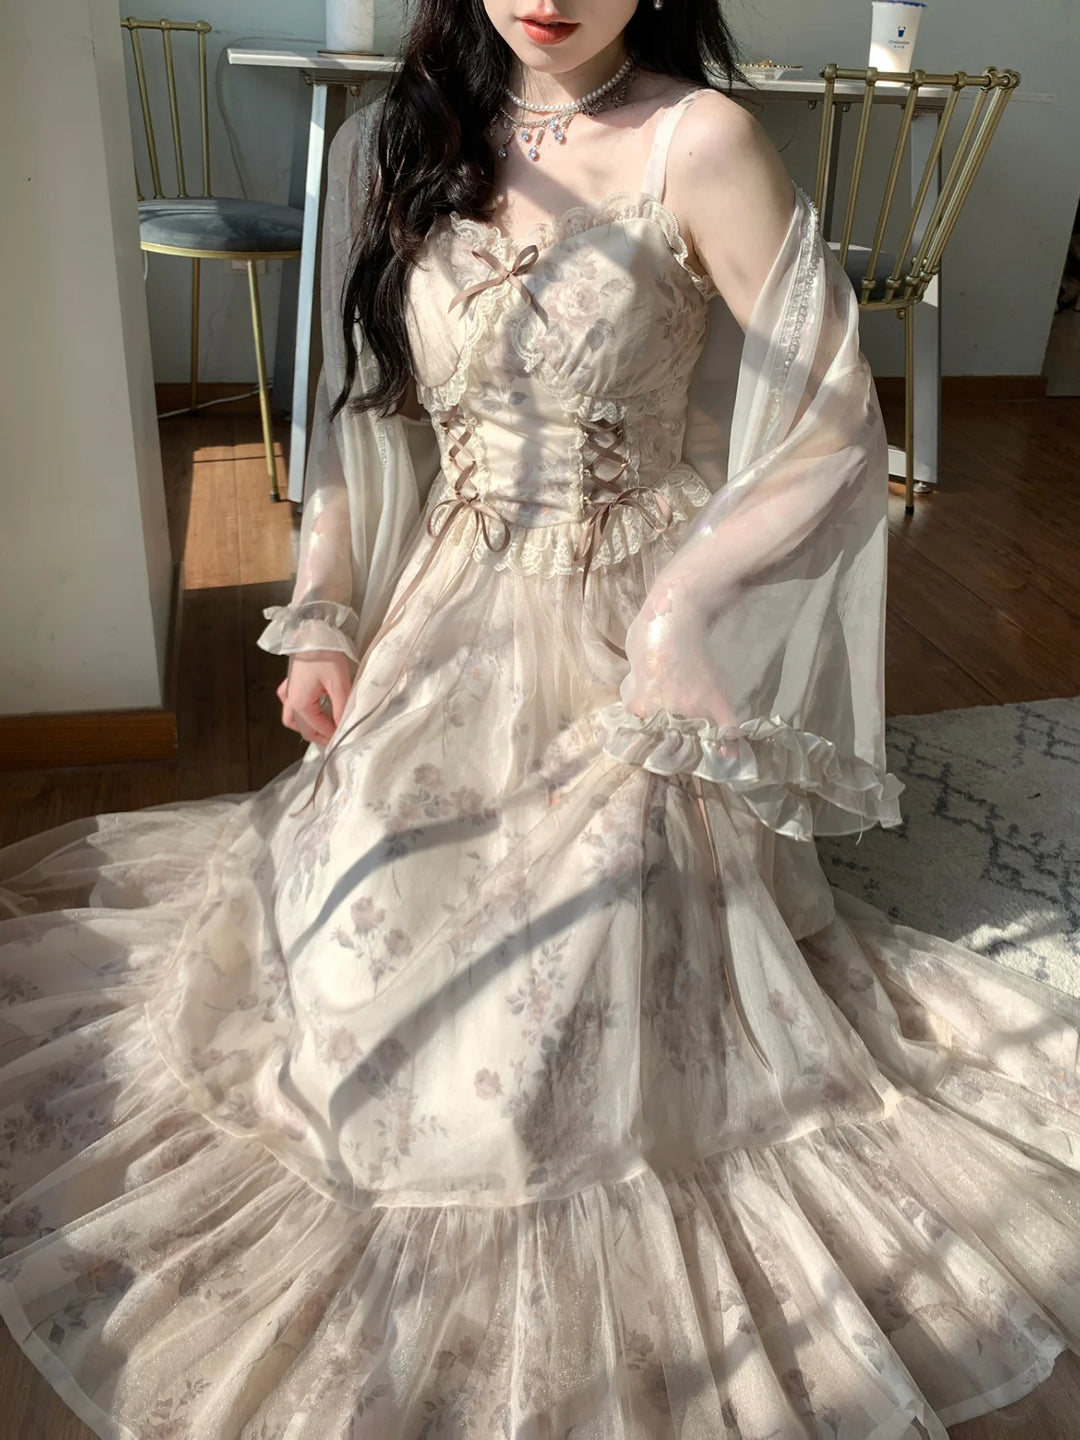 Long Fairy Dress With Ruffles And Tender Floral Pattern